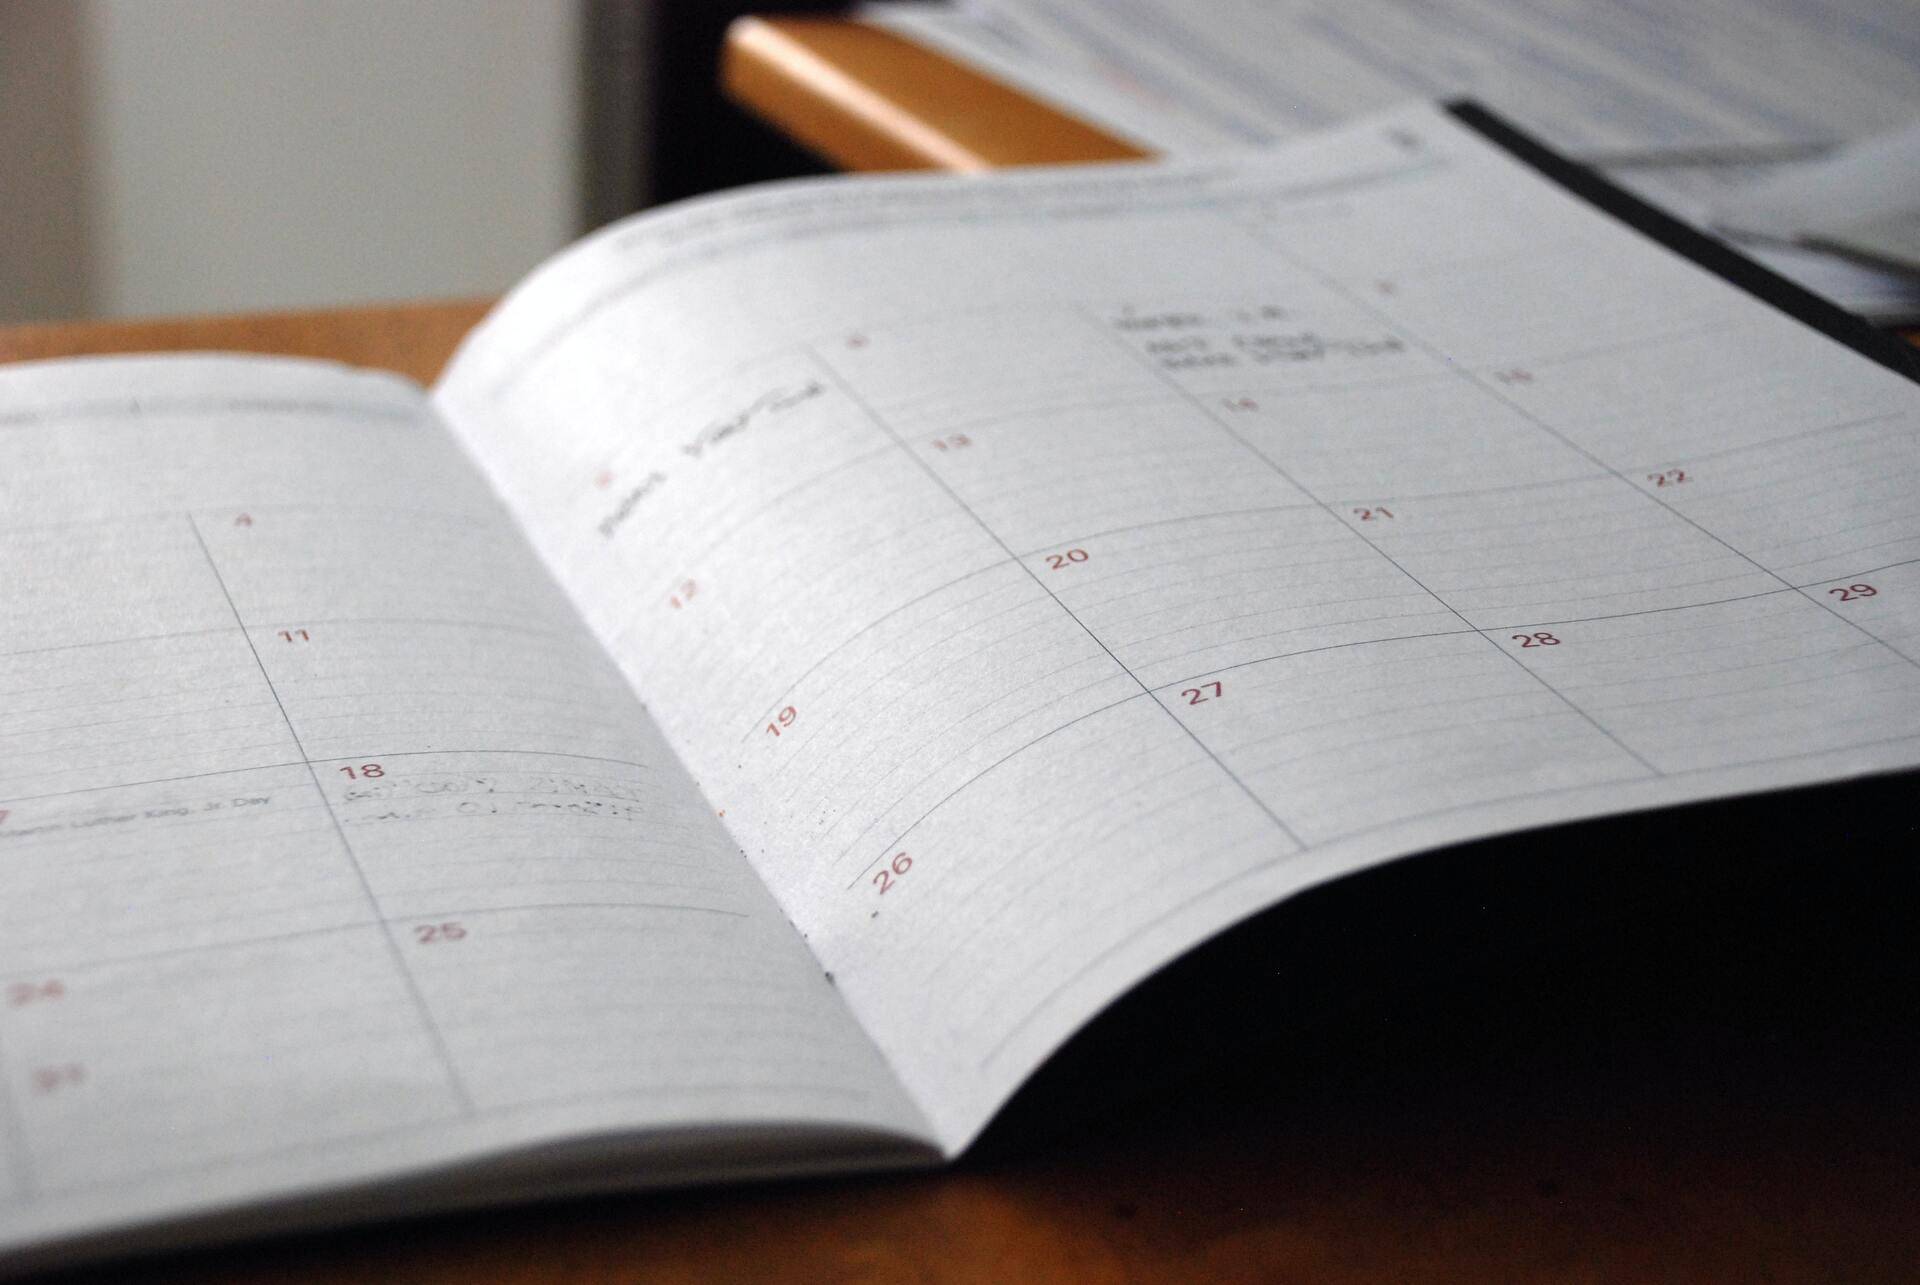 monthly calendar schedule open on a table